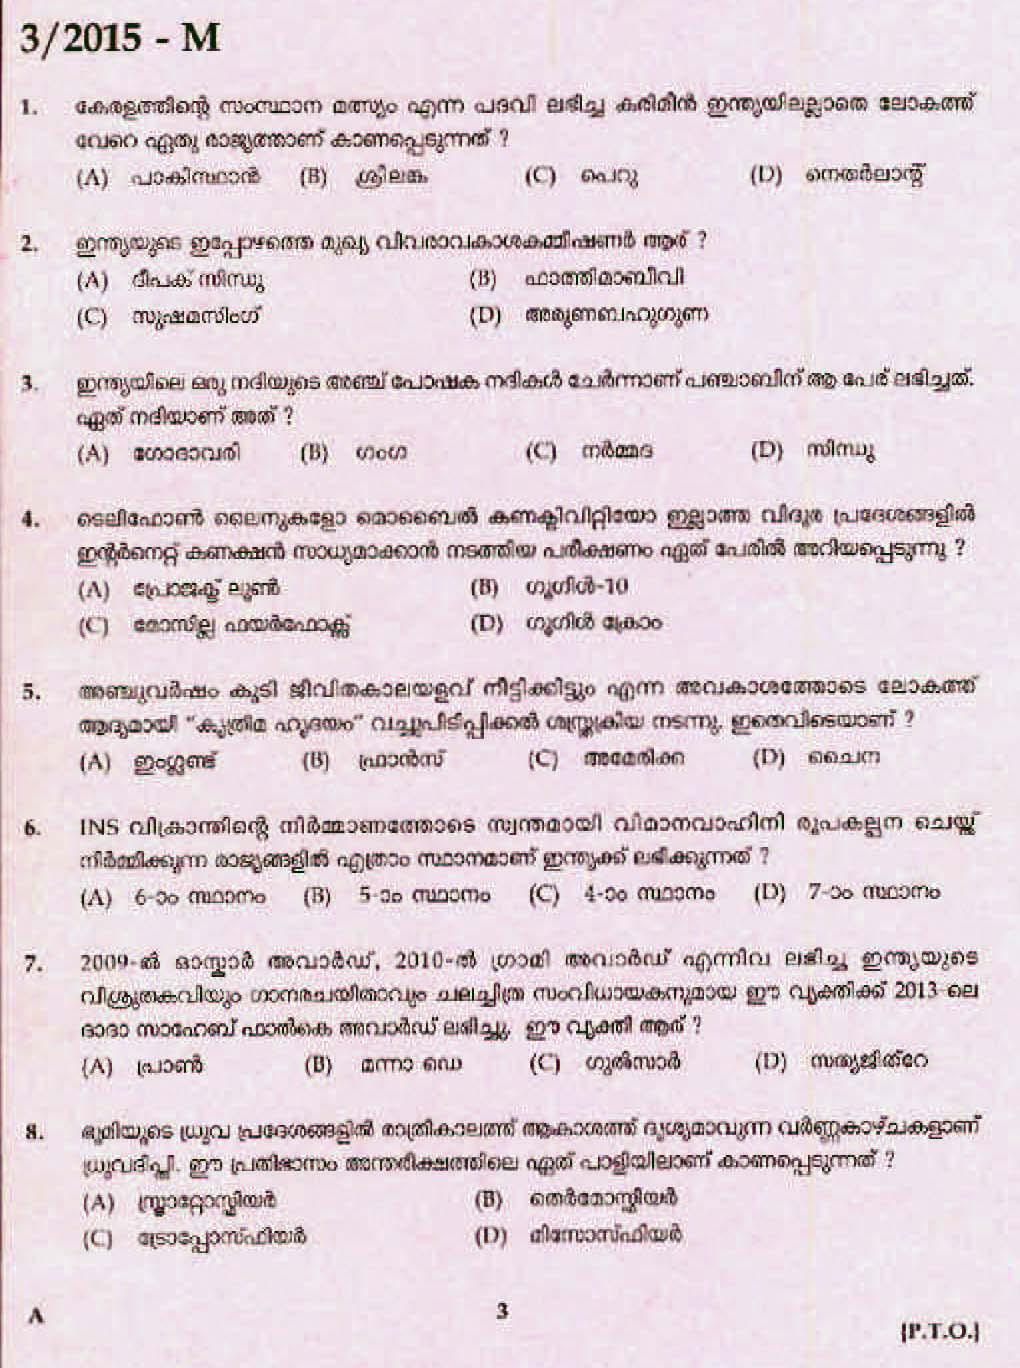 LD Clerk Thrissur District Question Paper Malayalam 2015 Paper Code 32015 M 1